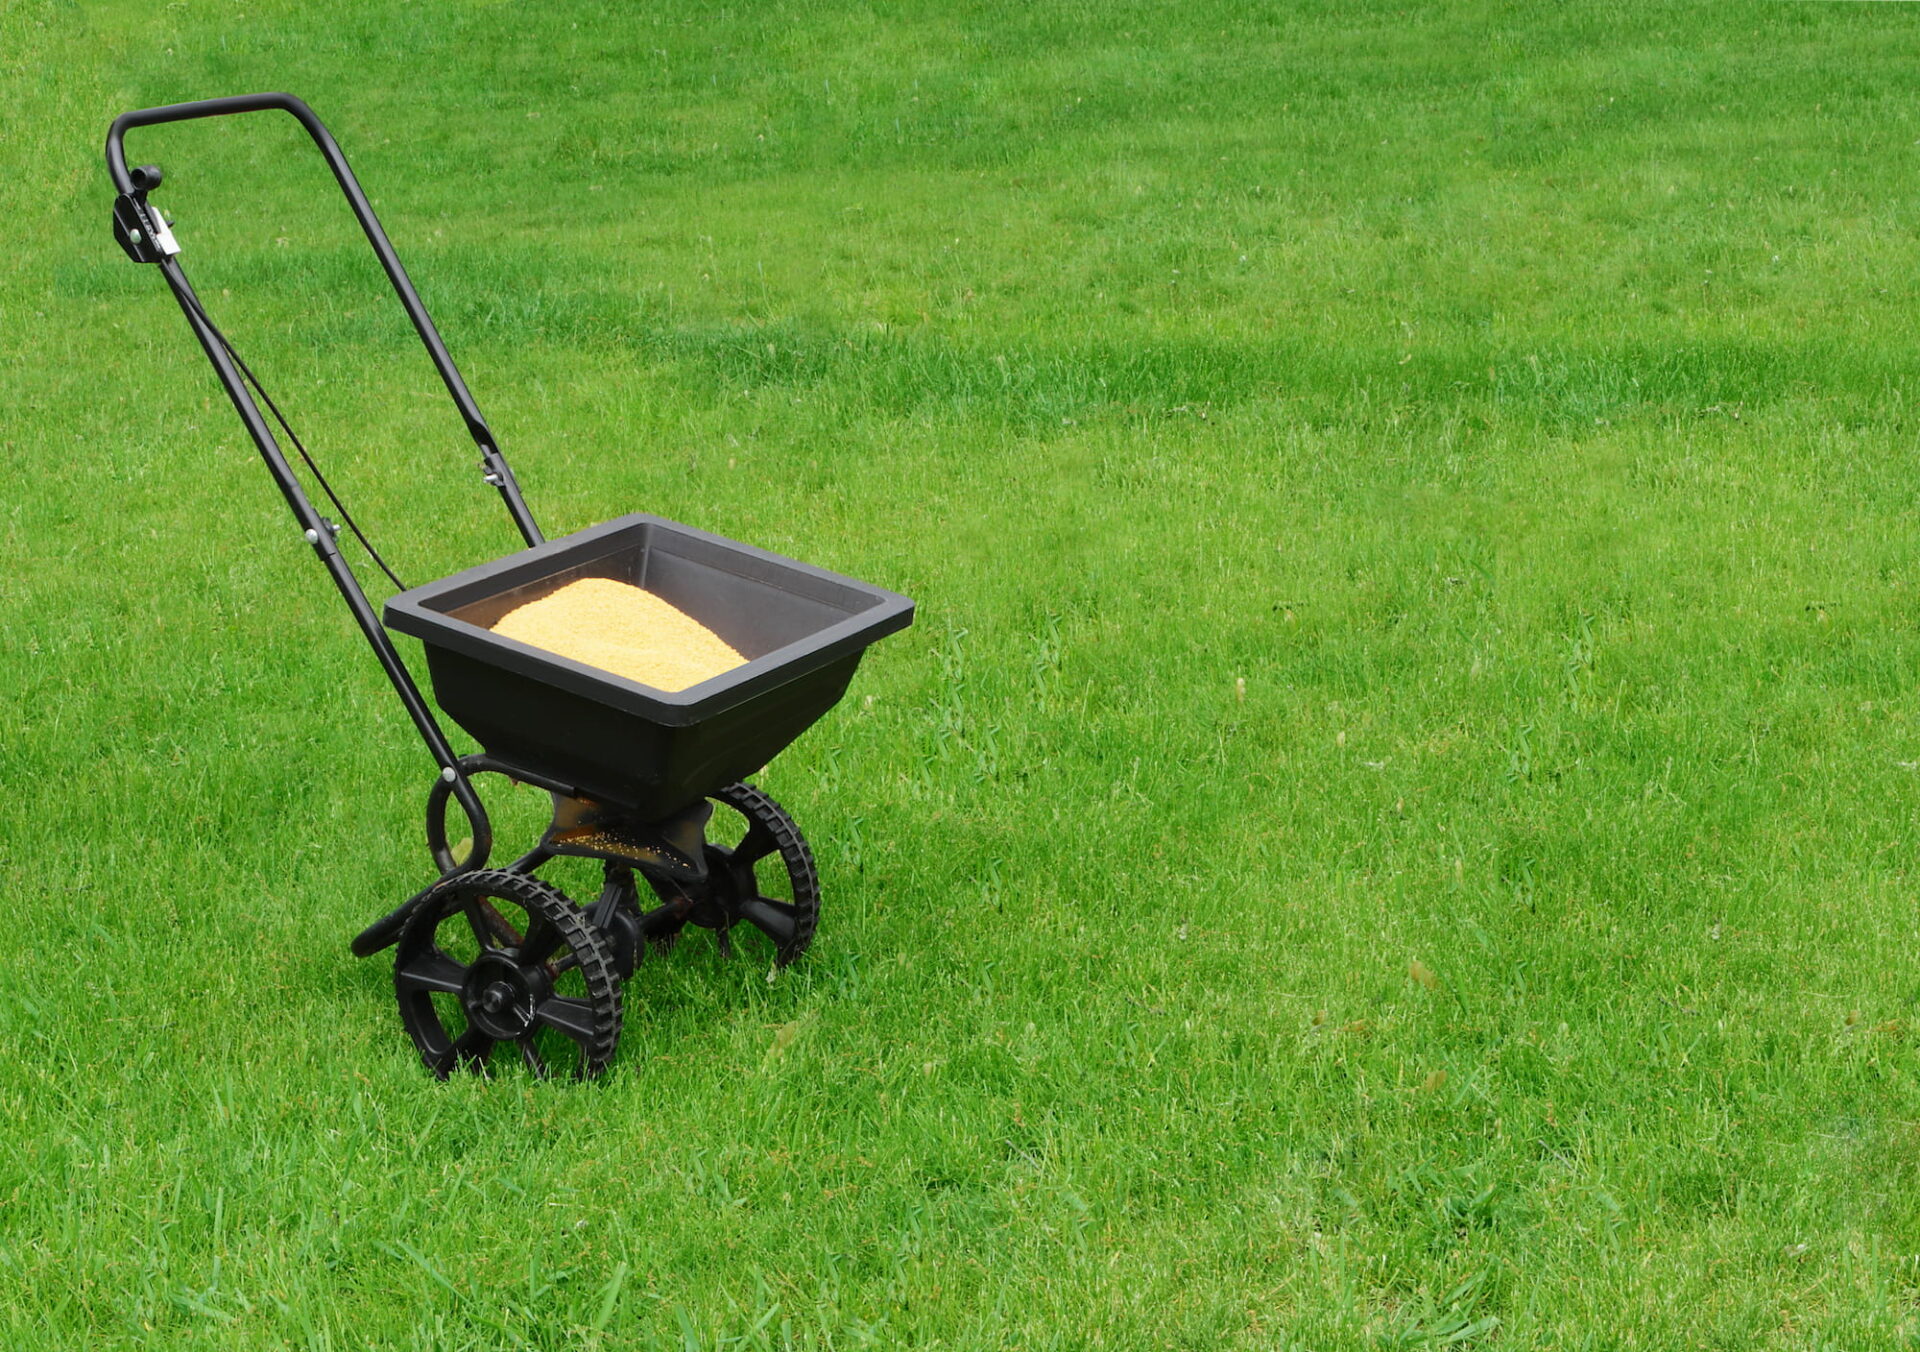 A tool used to spread fertilizer on the lawn.